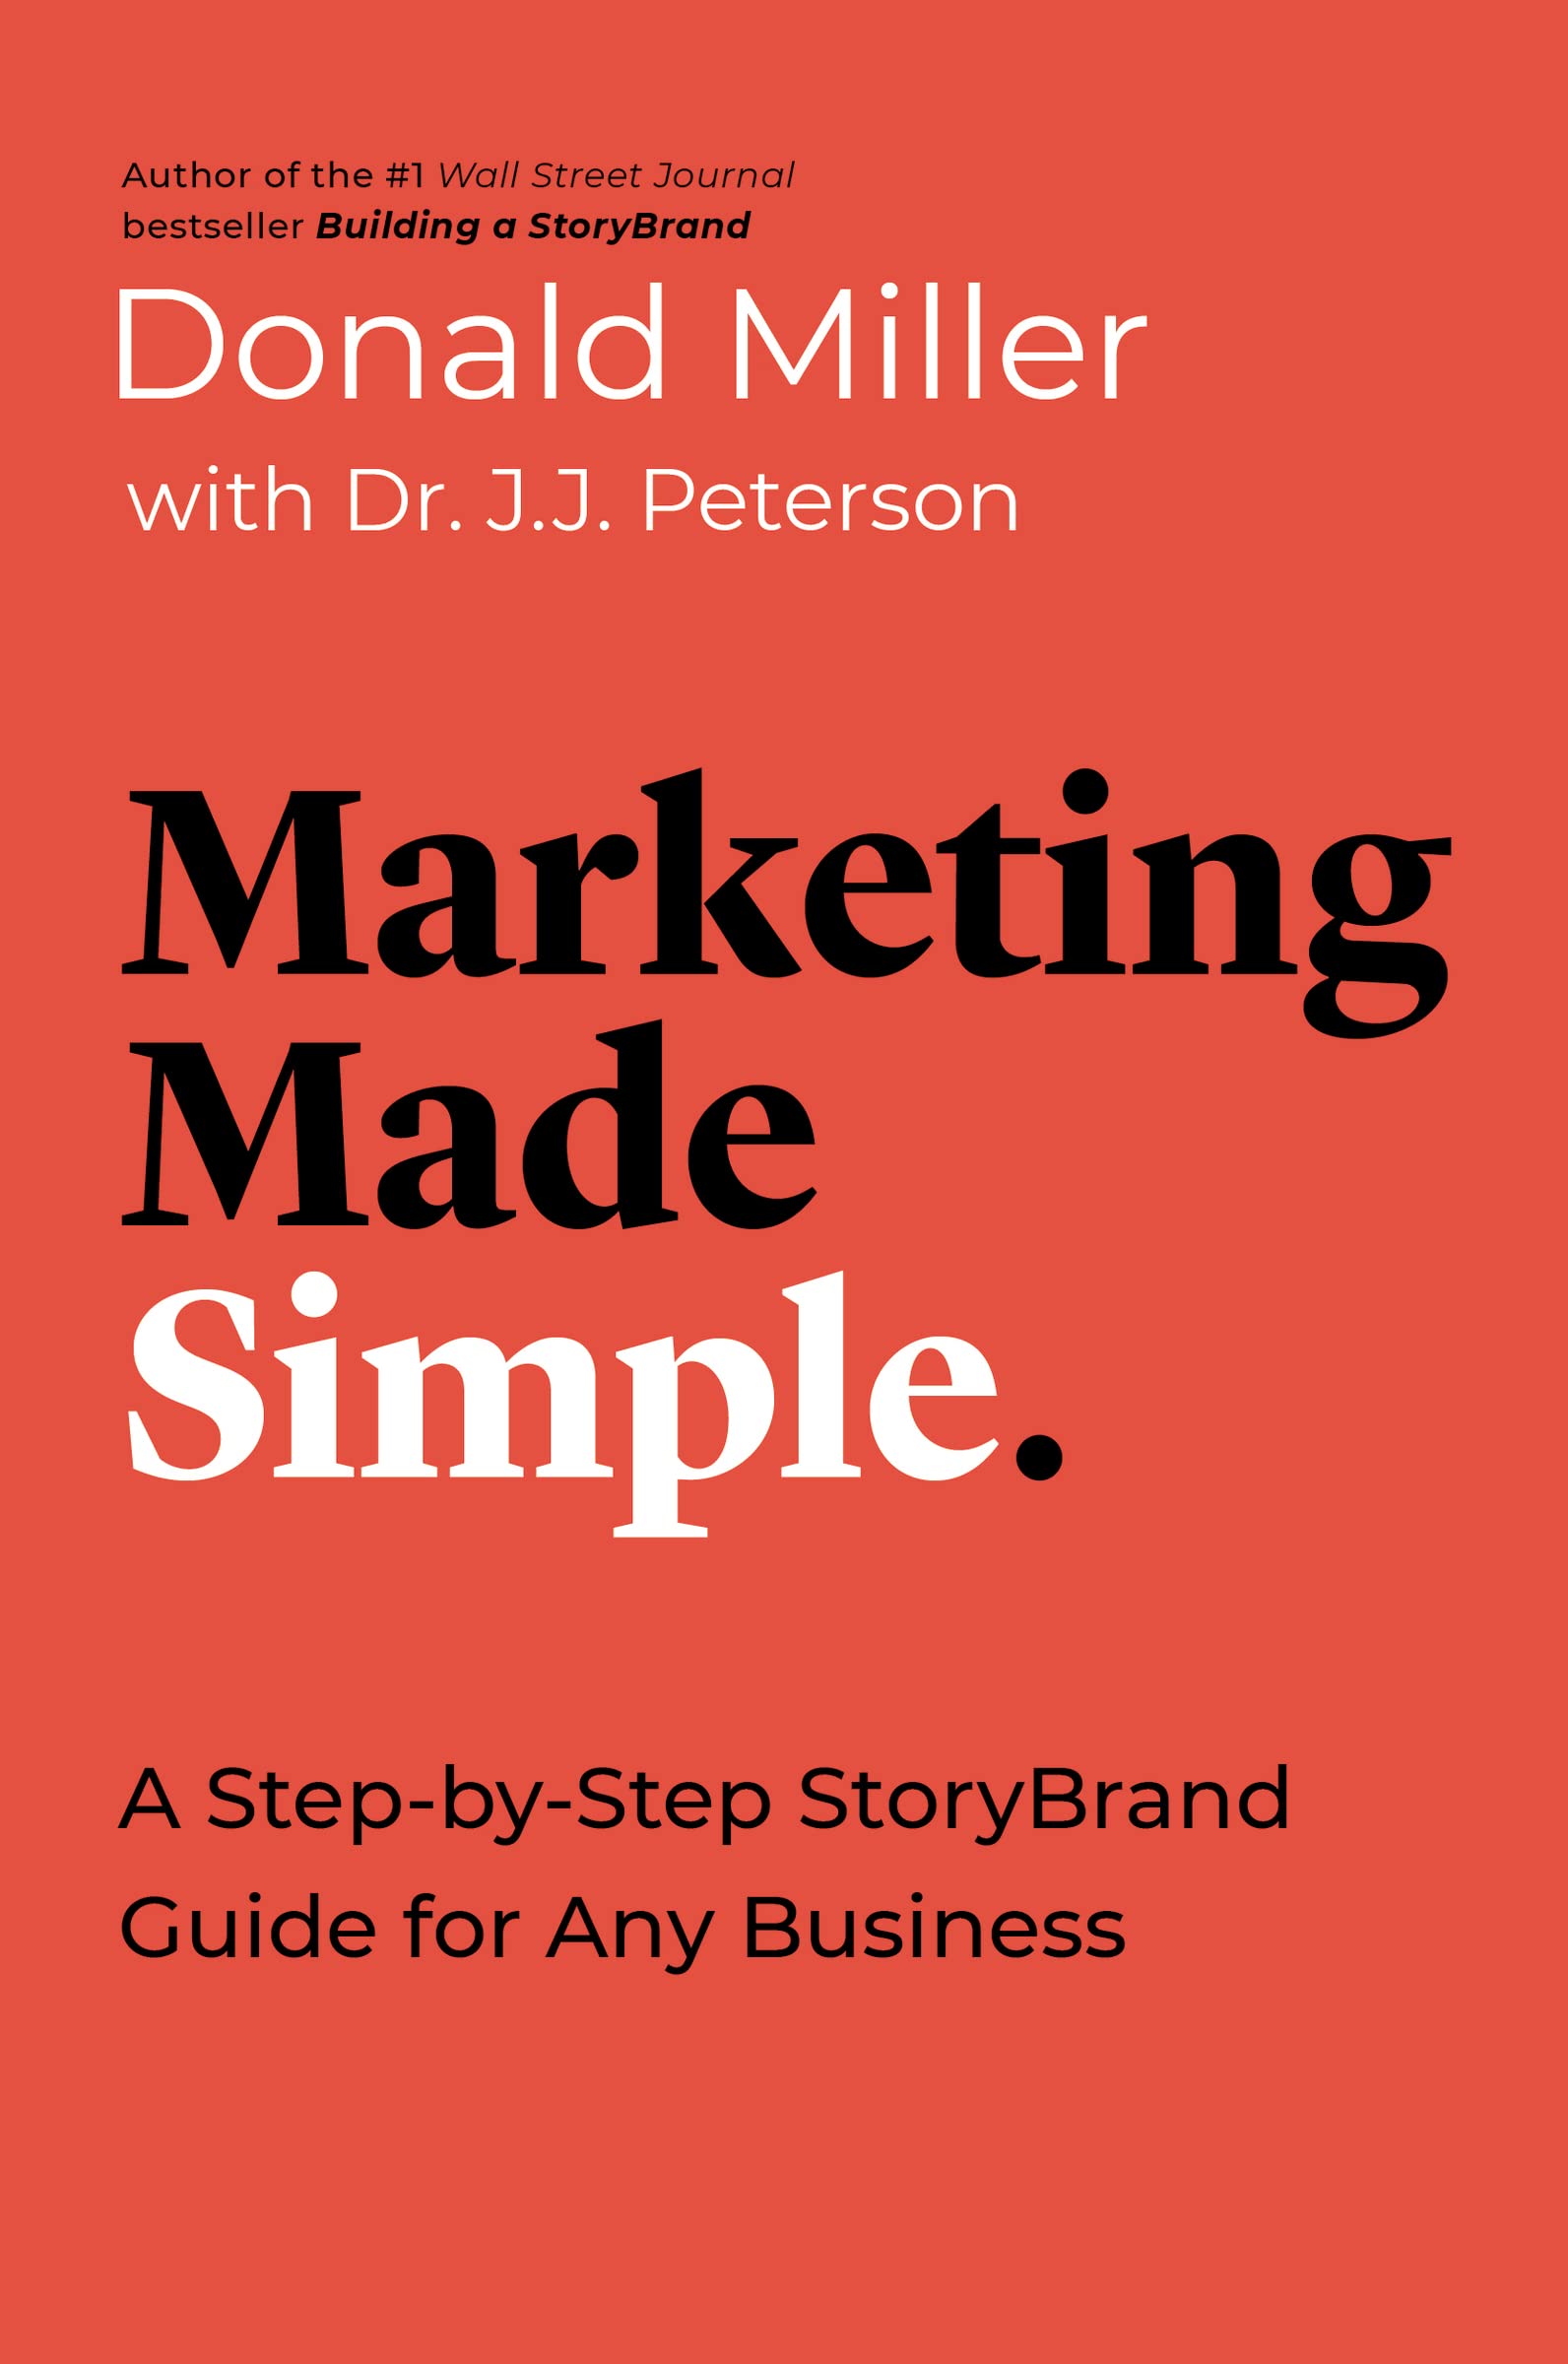 Marketing Made Simple: A Step-by-Step StoryBrand Guide for Any Business (Made Simple Series)